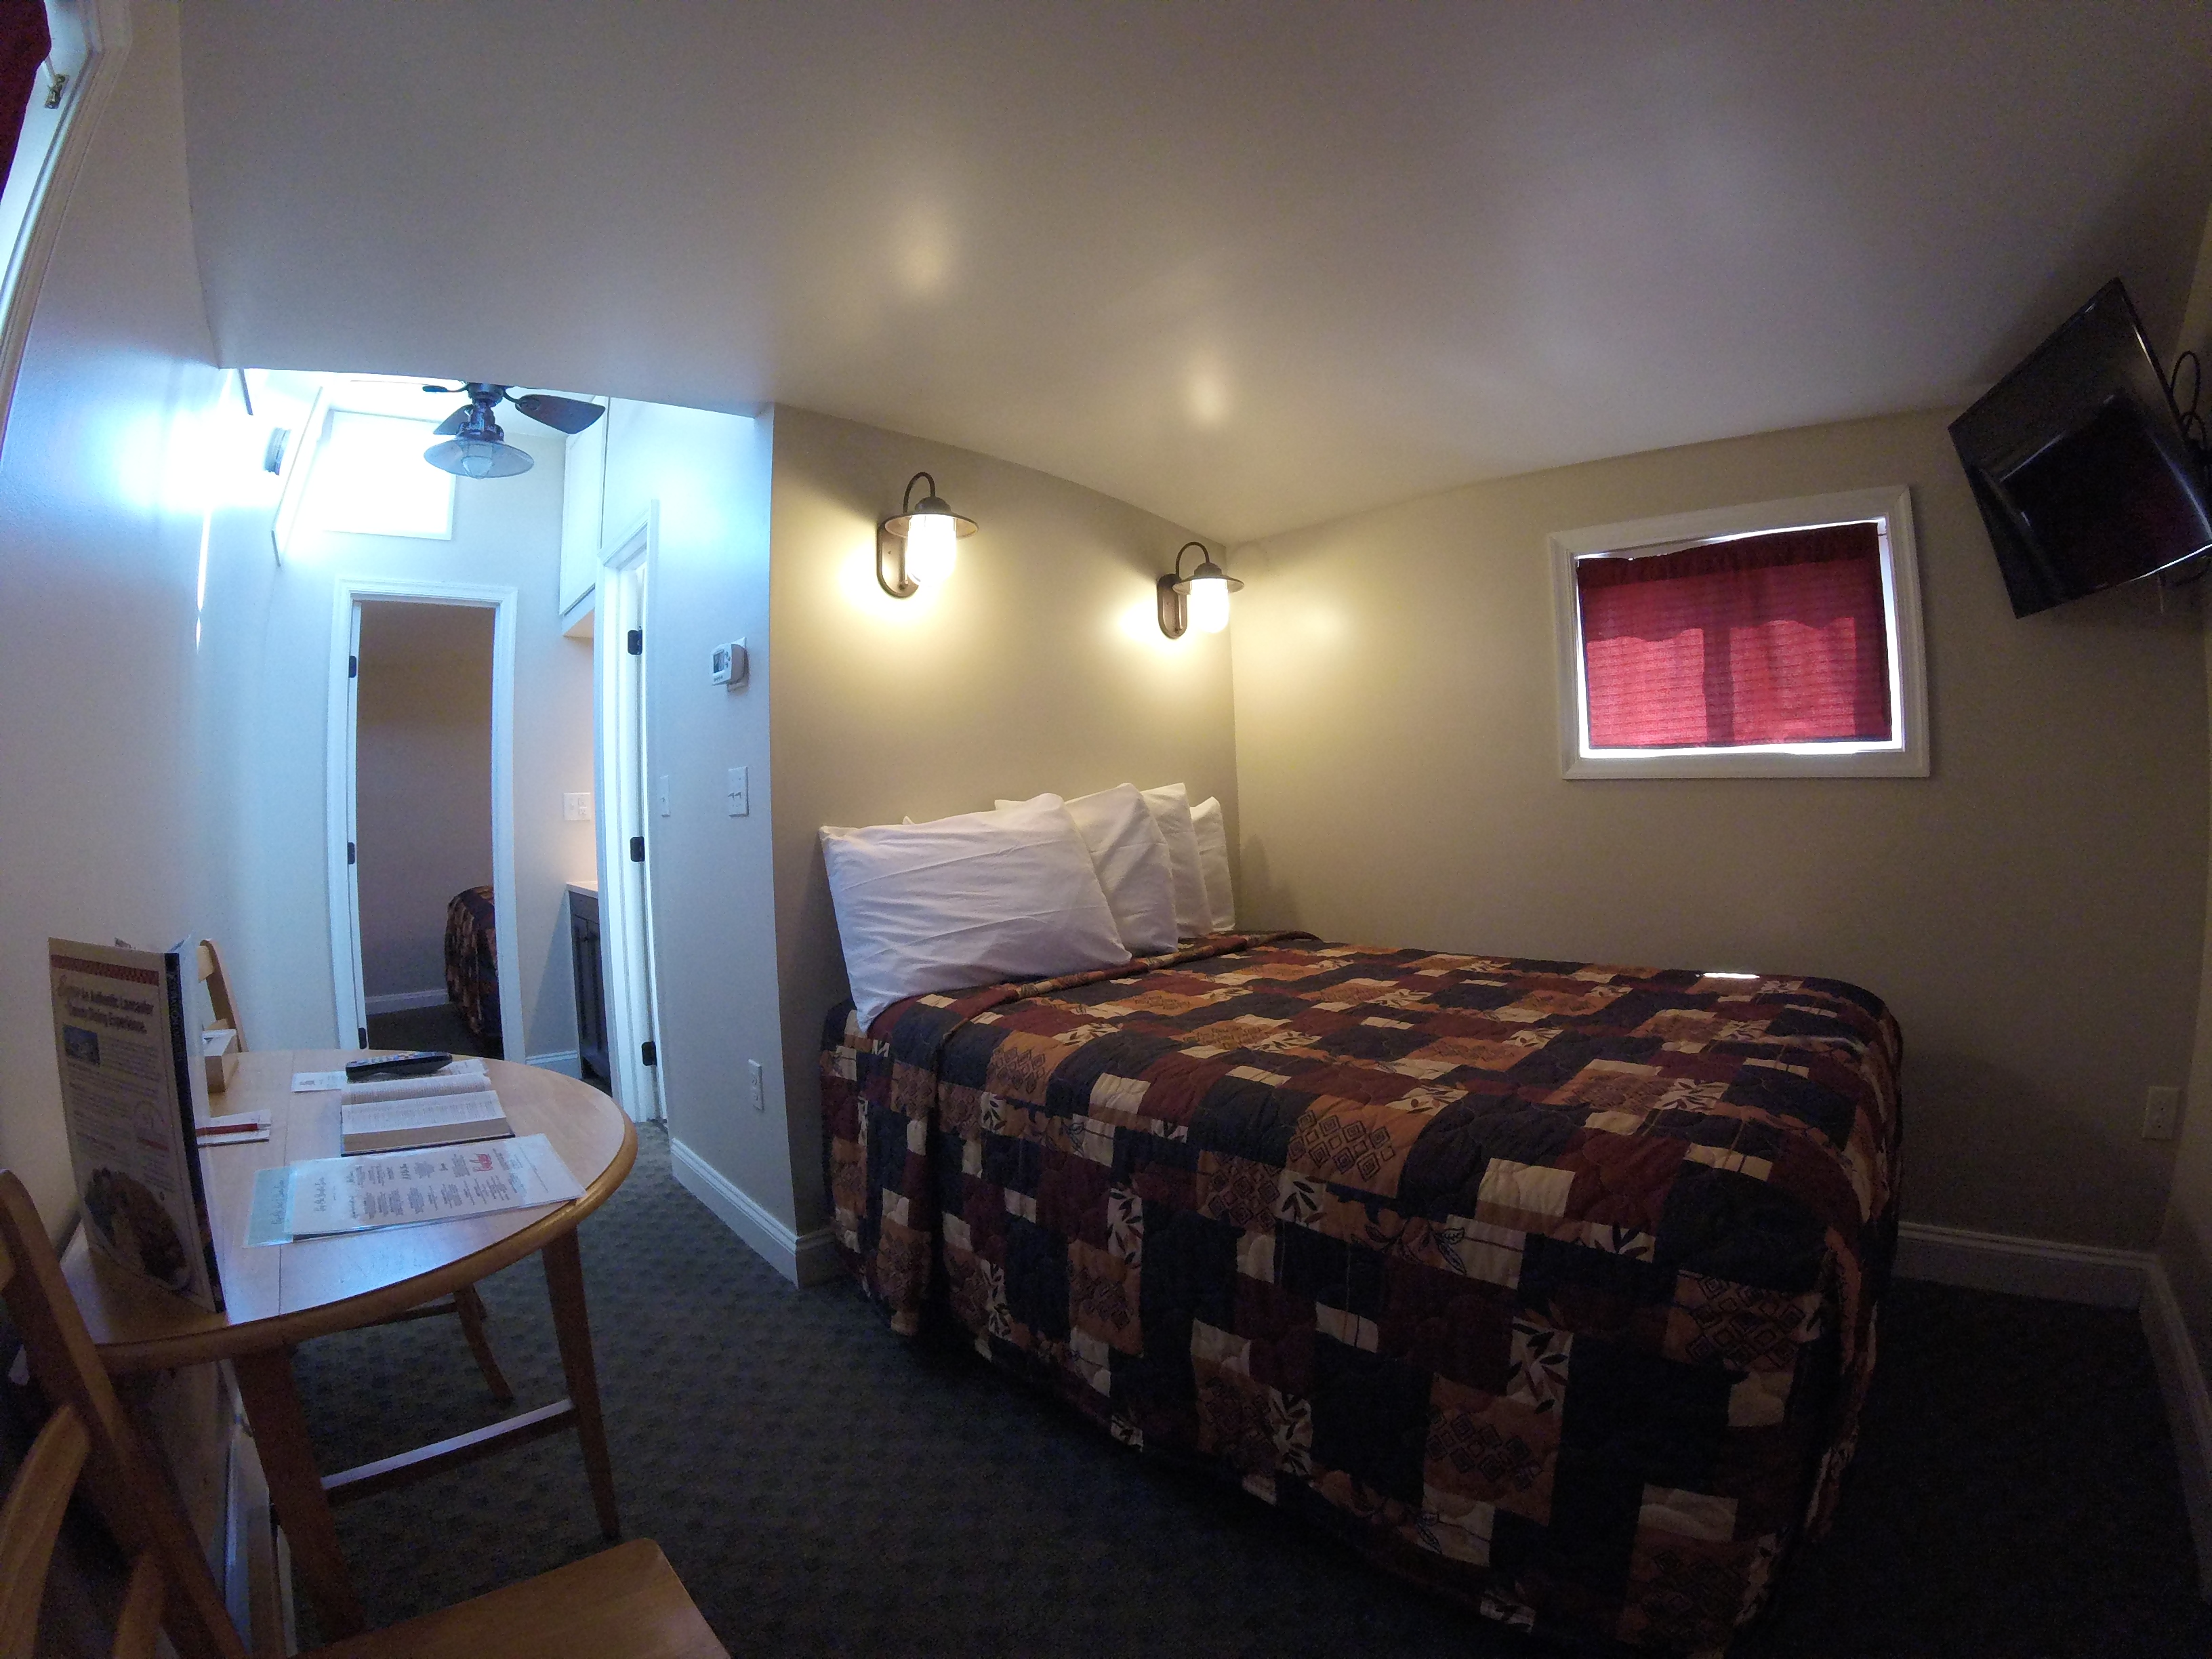 interior view of double double caboose motel room